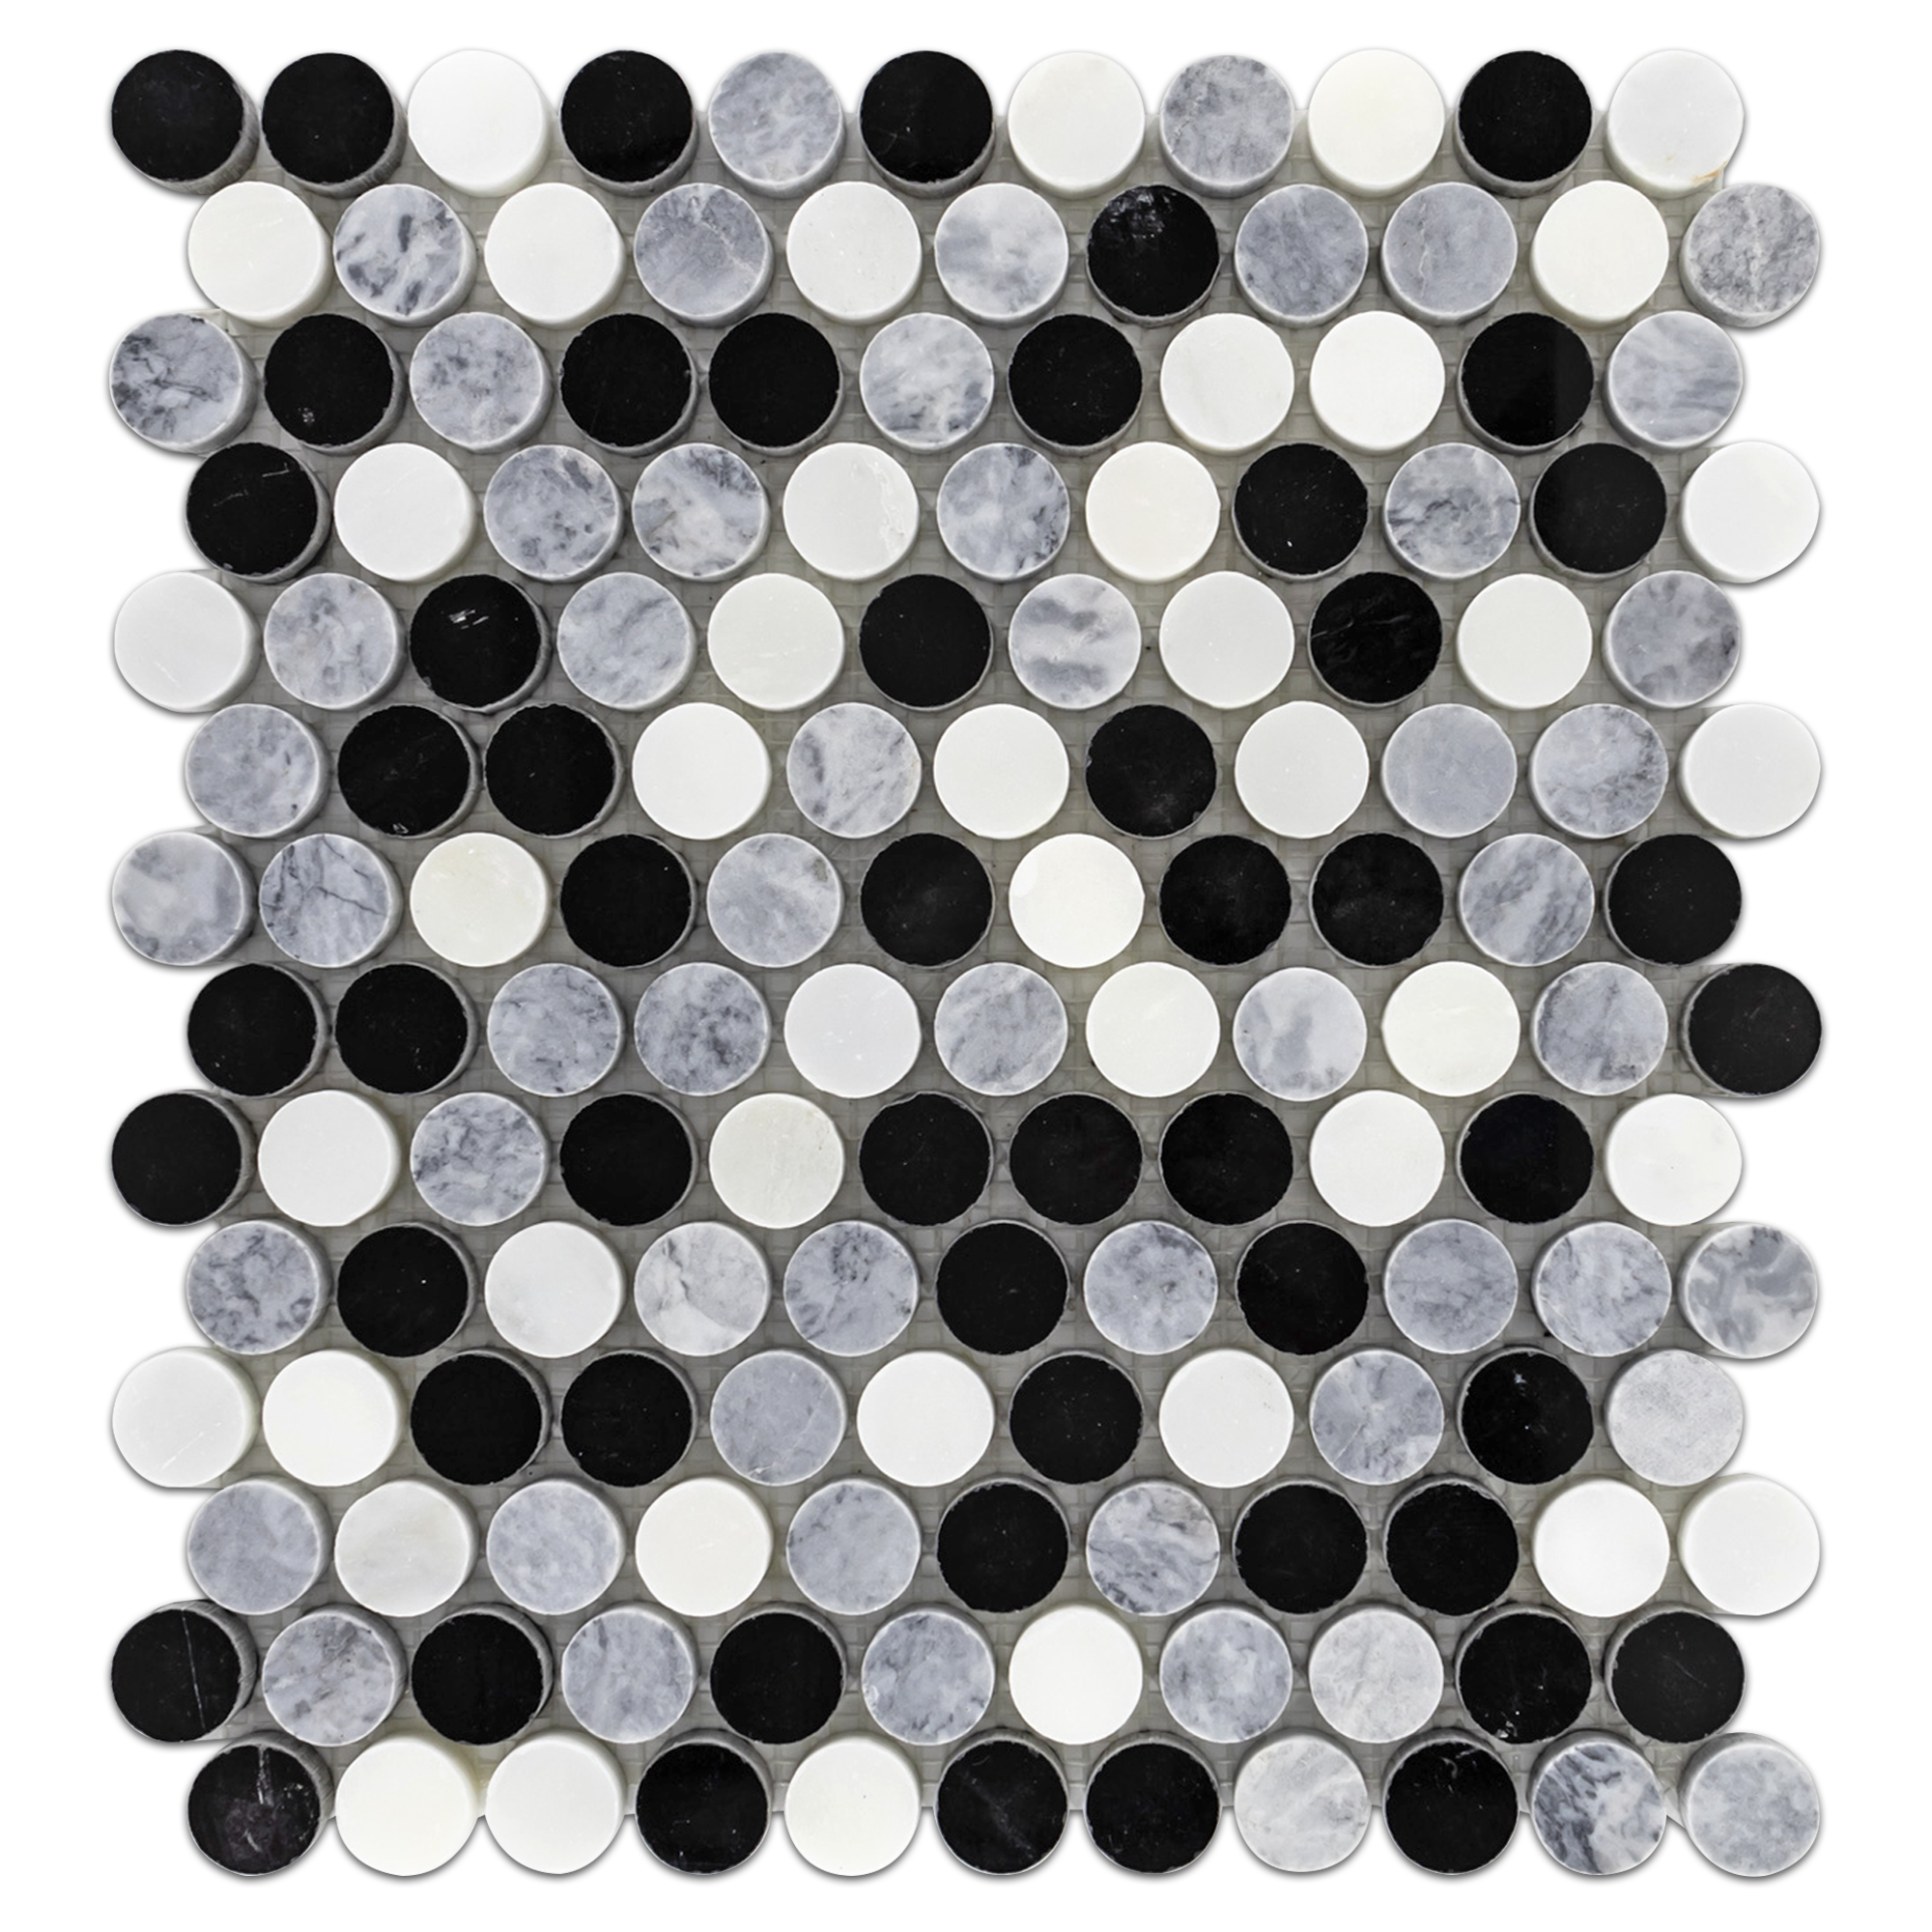 Elon Pacific Gray Black Pearl White Marble Stone Blend Penny Rounds Field Mosaic 11.5625x12.875x0.375 Polished SM1010P Surface Group International Product